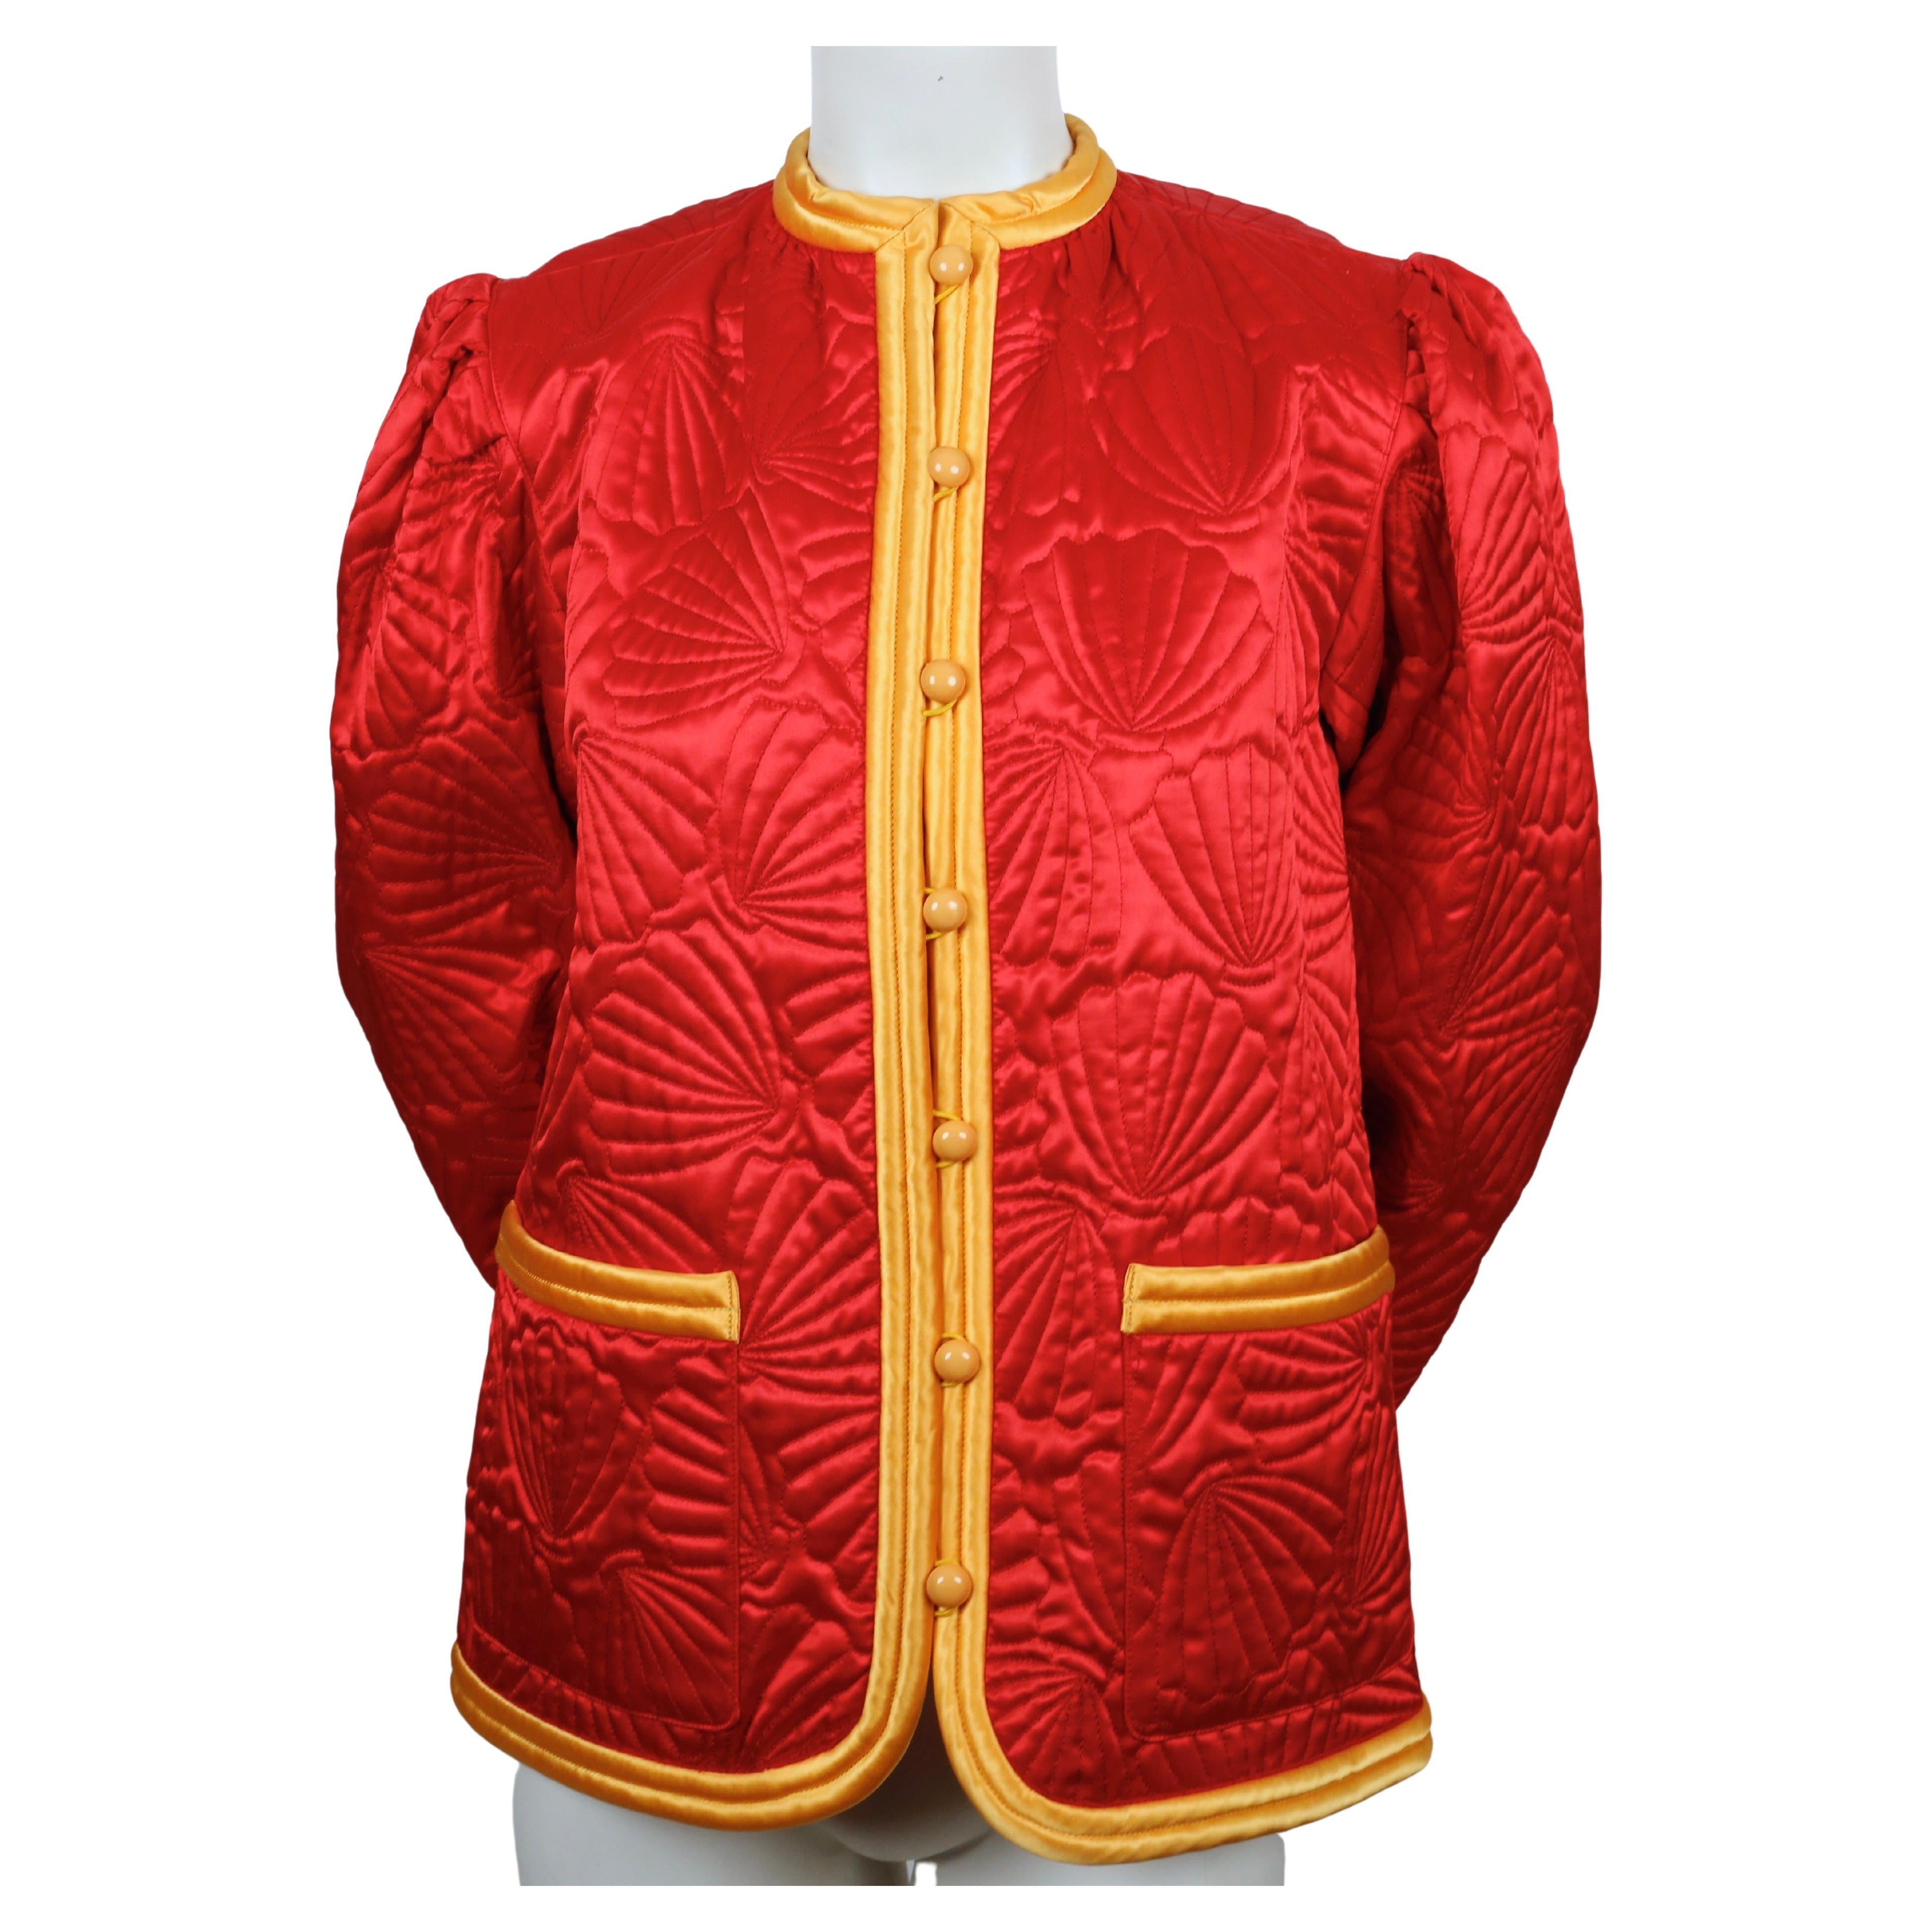 Very rare, quilted, red-satin jacket with seashell embroidery and yellow trim designed by Yves Saint Laurent as seen on the spring 1979 runway. FR 38. Approximate measurements: shoulder 15